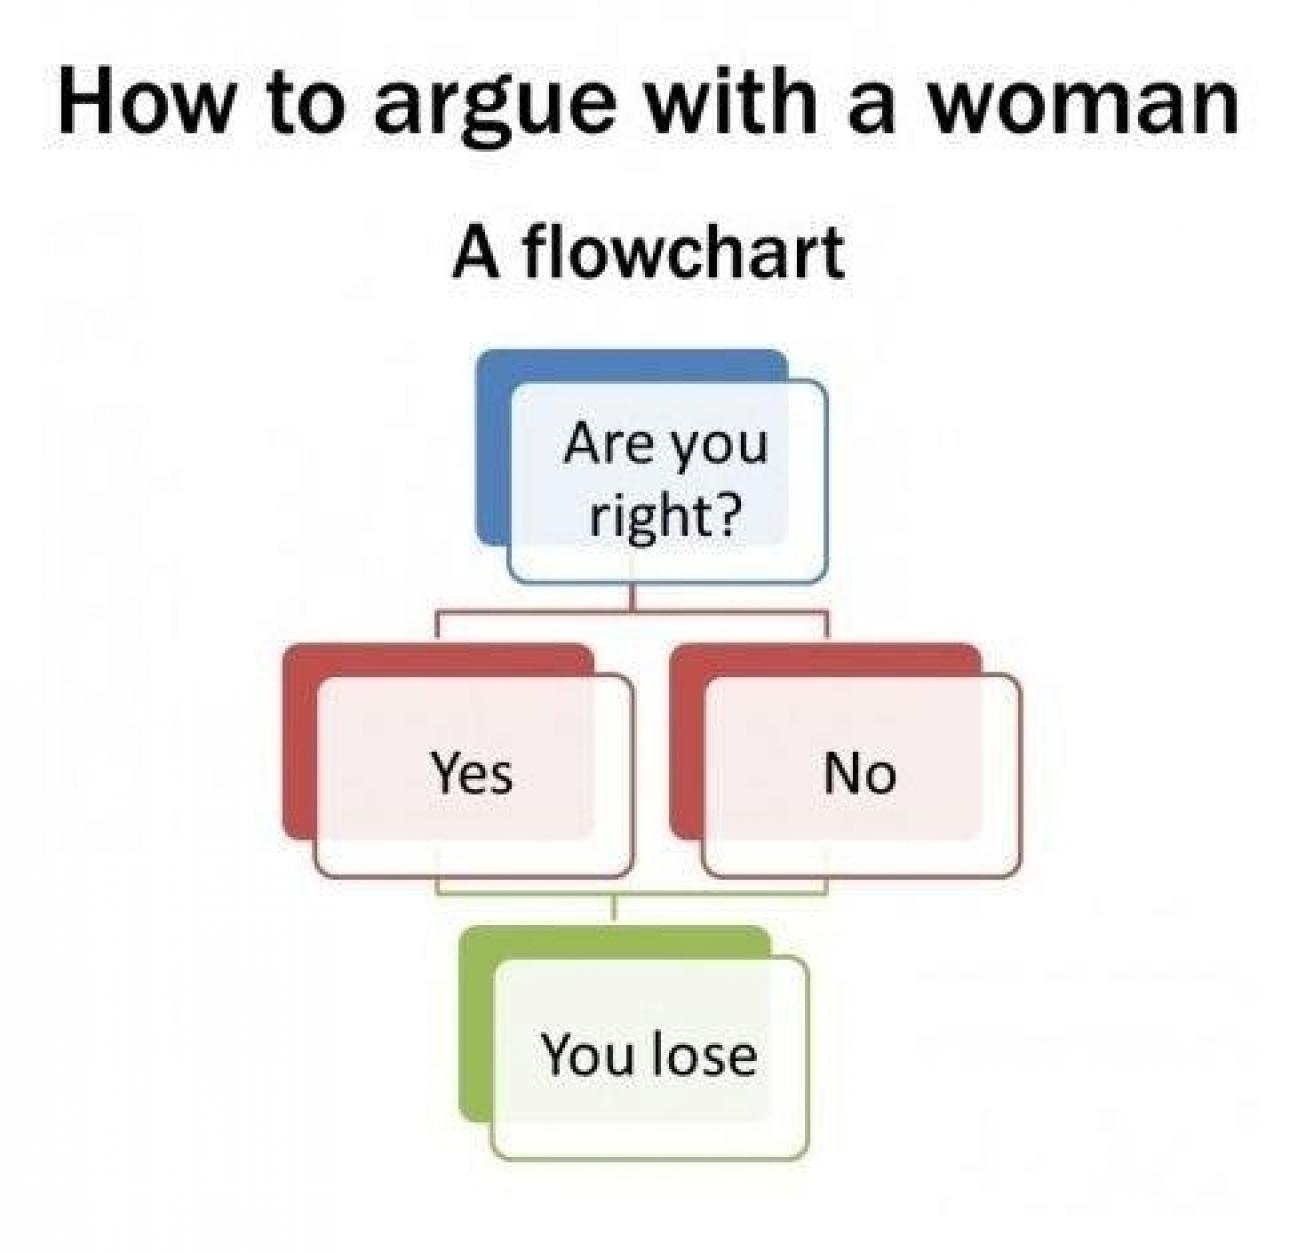 argue with a woman flowchart - How to argue with a woman A flowchart Are you right? Are you Yes No You lose